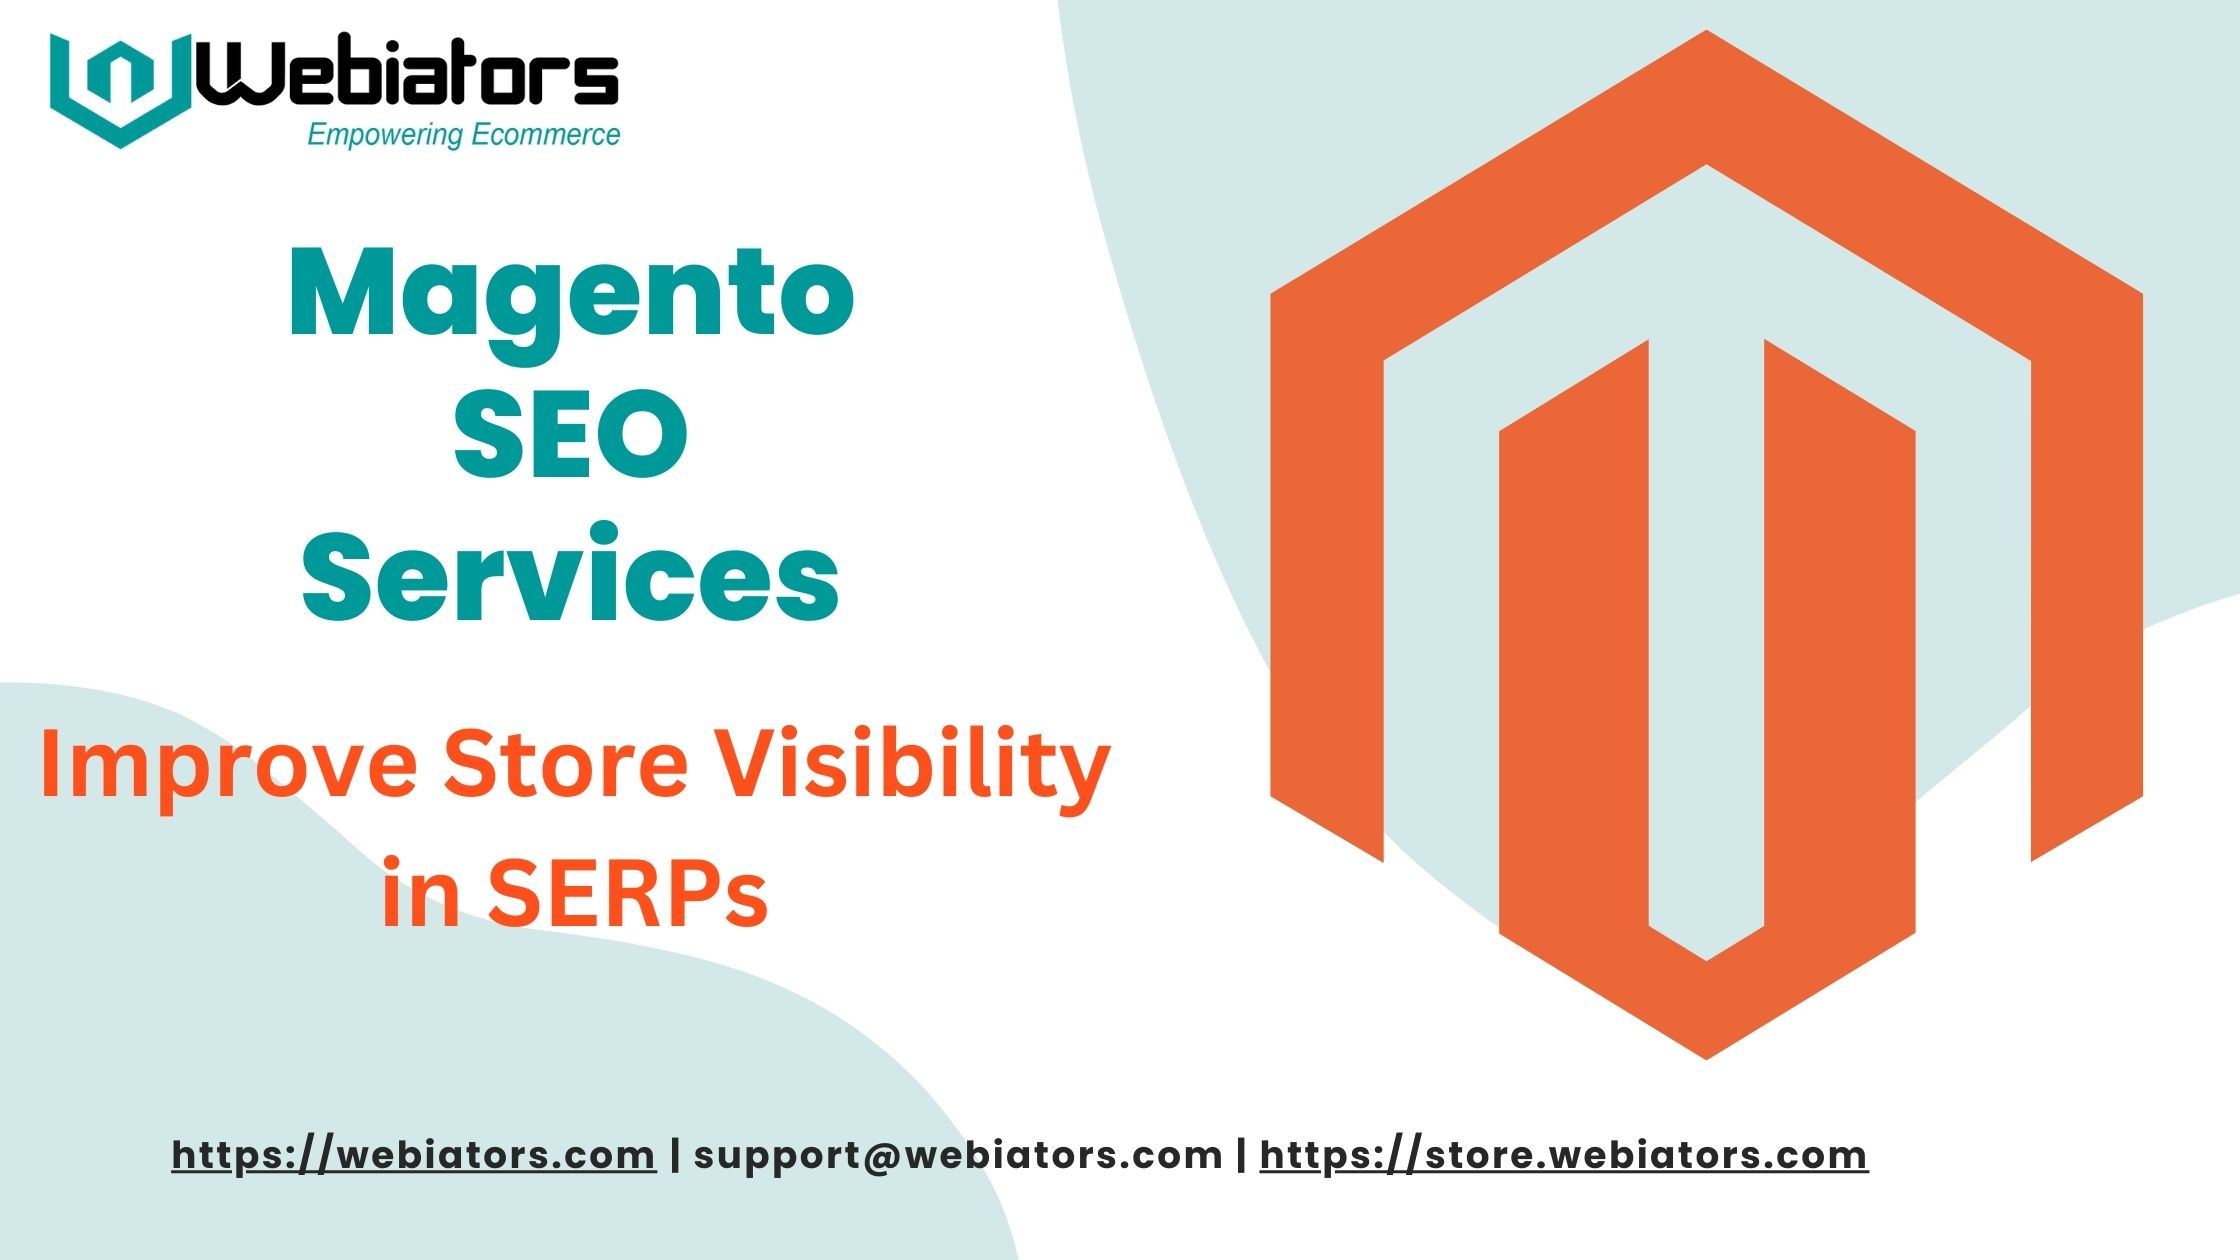 Magento SEO Services: Improve Store Visibility in SERPs - Webiators